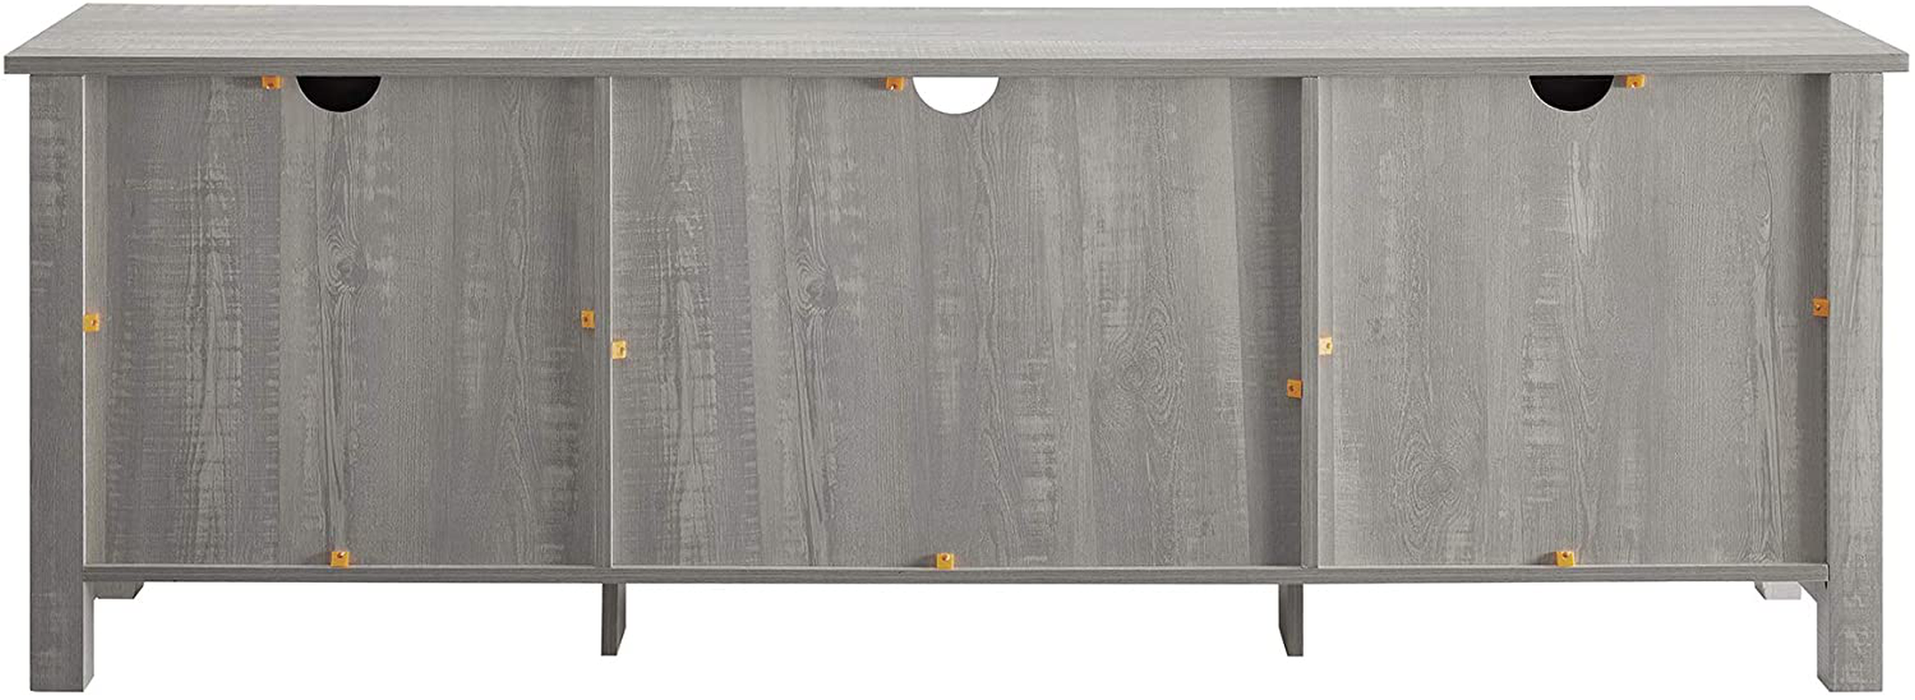 Walker Edison Ashbury Coastal Style Grooved Door TV Stand for TVs up to 80 Inches, 70 Inch, Stone Grey